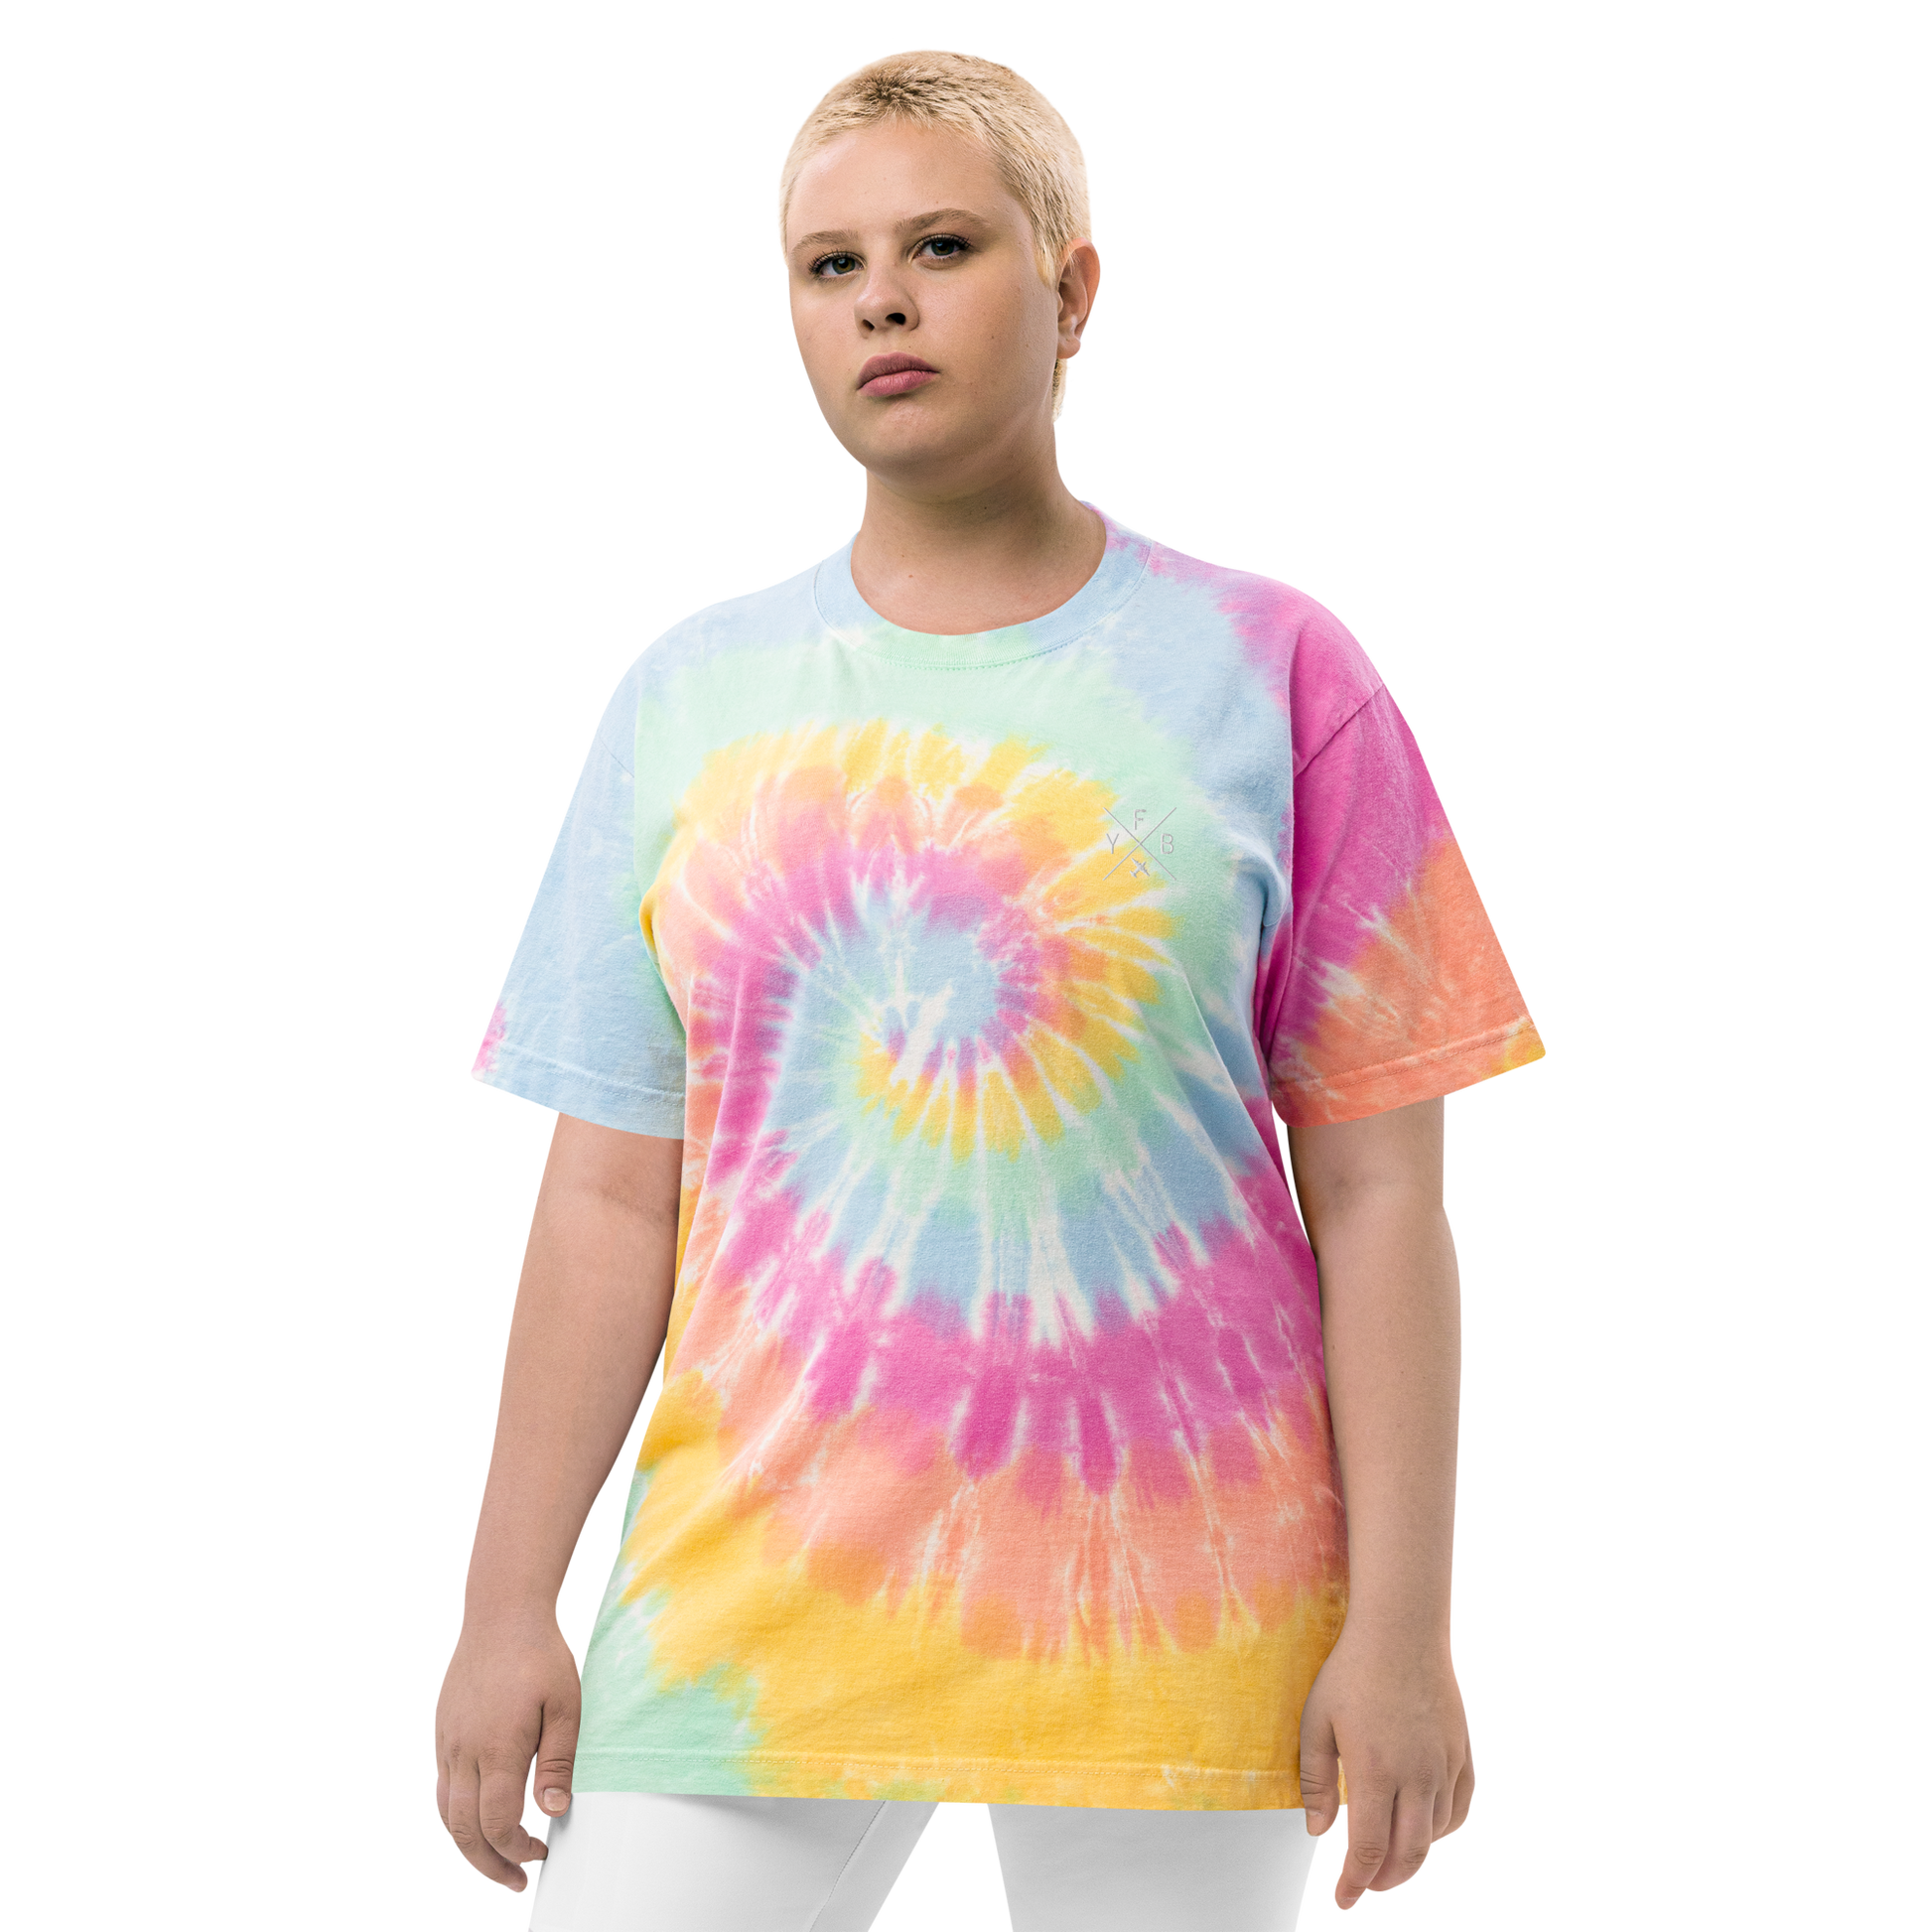 YHM Designs - YFB Iqaluit Oversized Tie-Dye T-Shirt - Crossed-X Design with Airport Code and Vintage Propliner - White Embroidery - Image 11